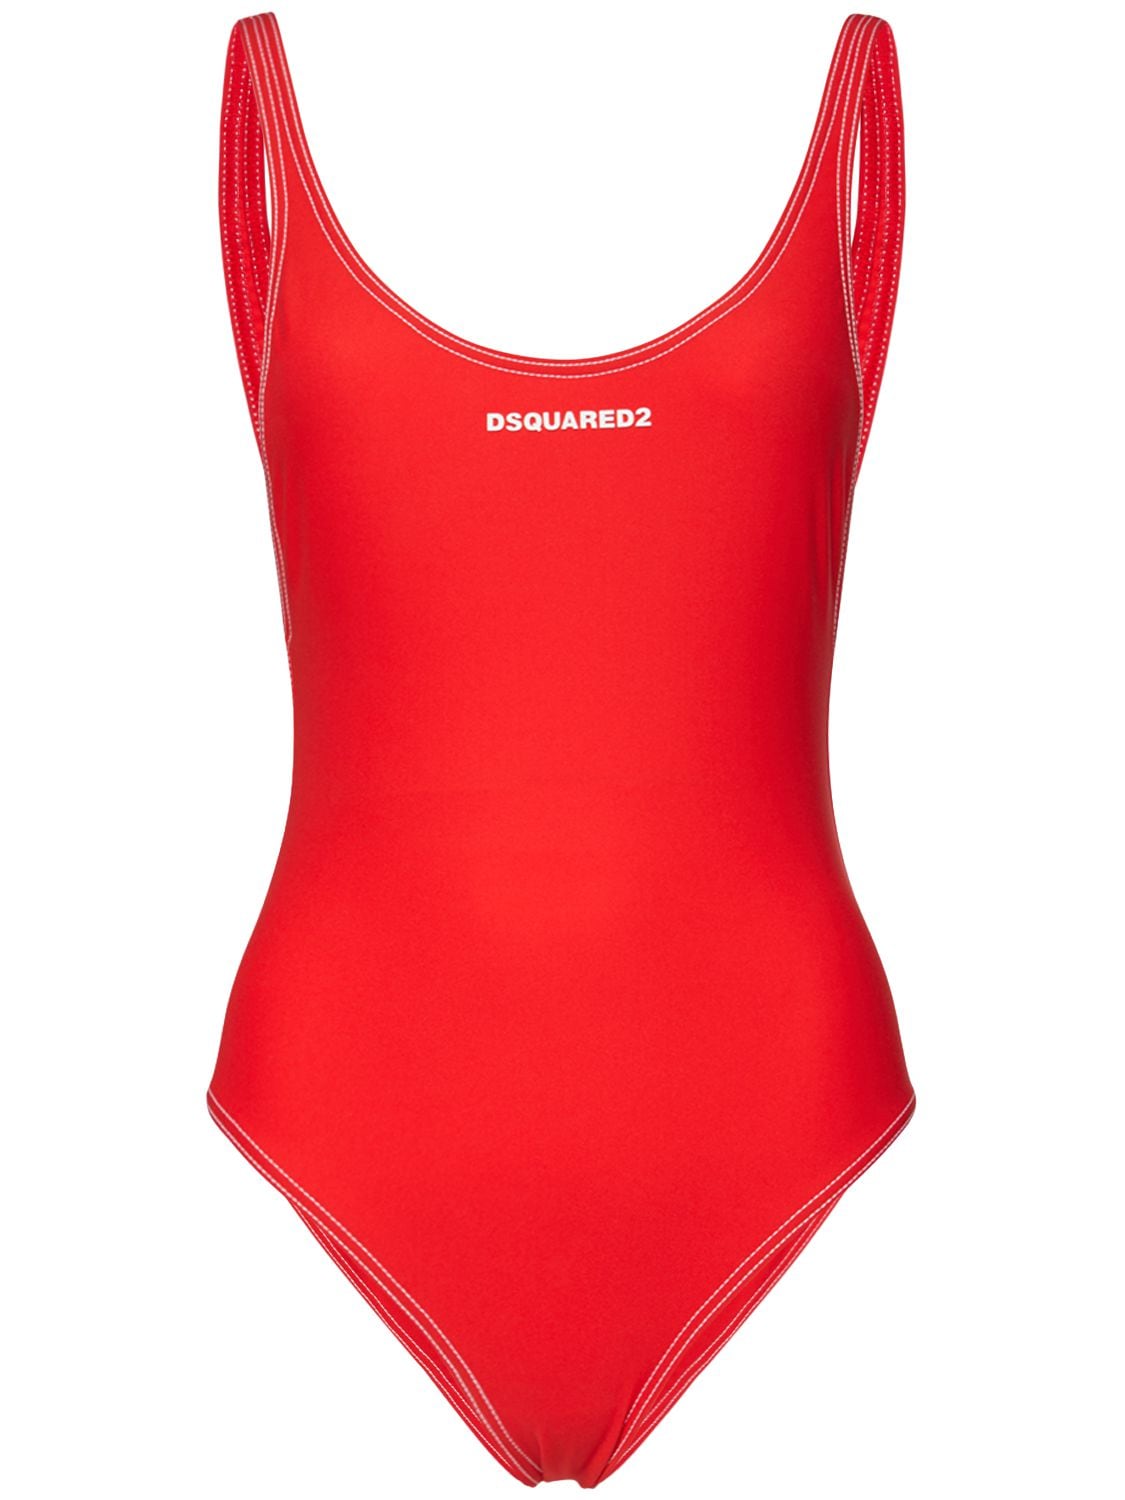 DSQUARED2 LOGO PRINT ONEPIECE SWIMSUIT